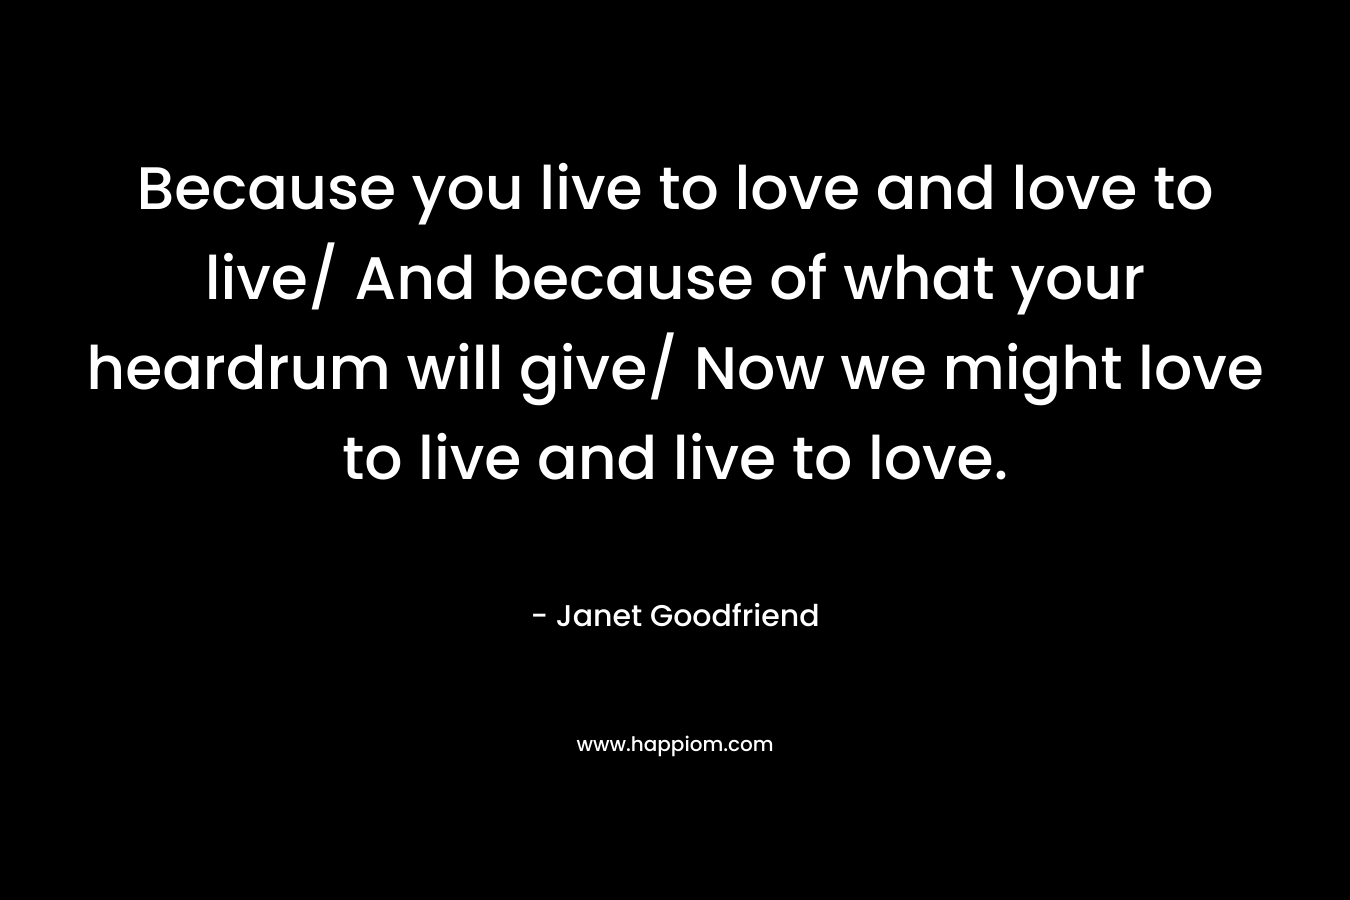 Because you live to love and love to live/ And because of what your heardrum will give/ Now we might love to live and live to love.